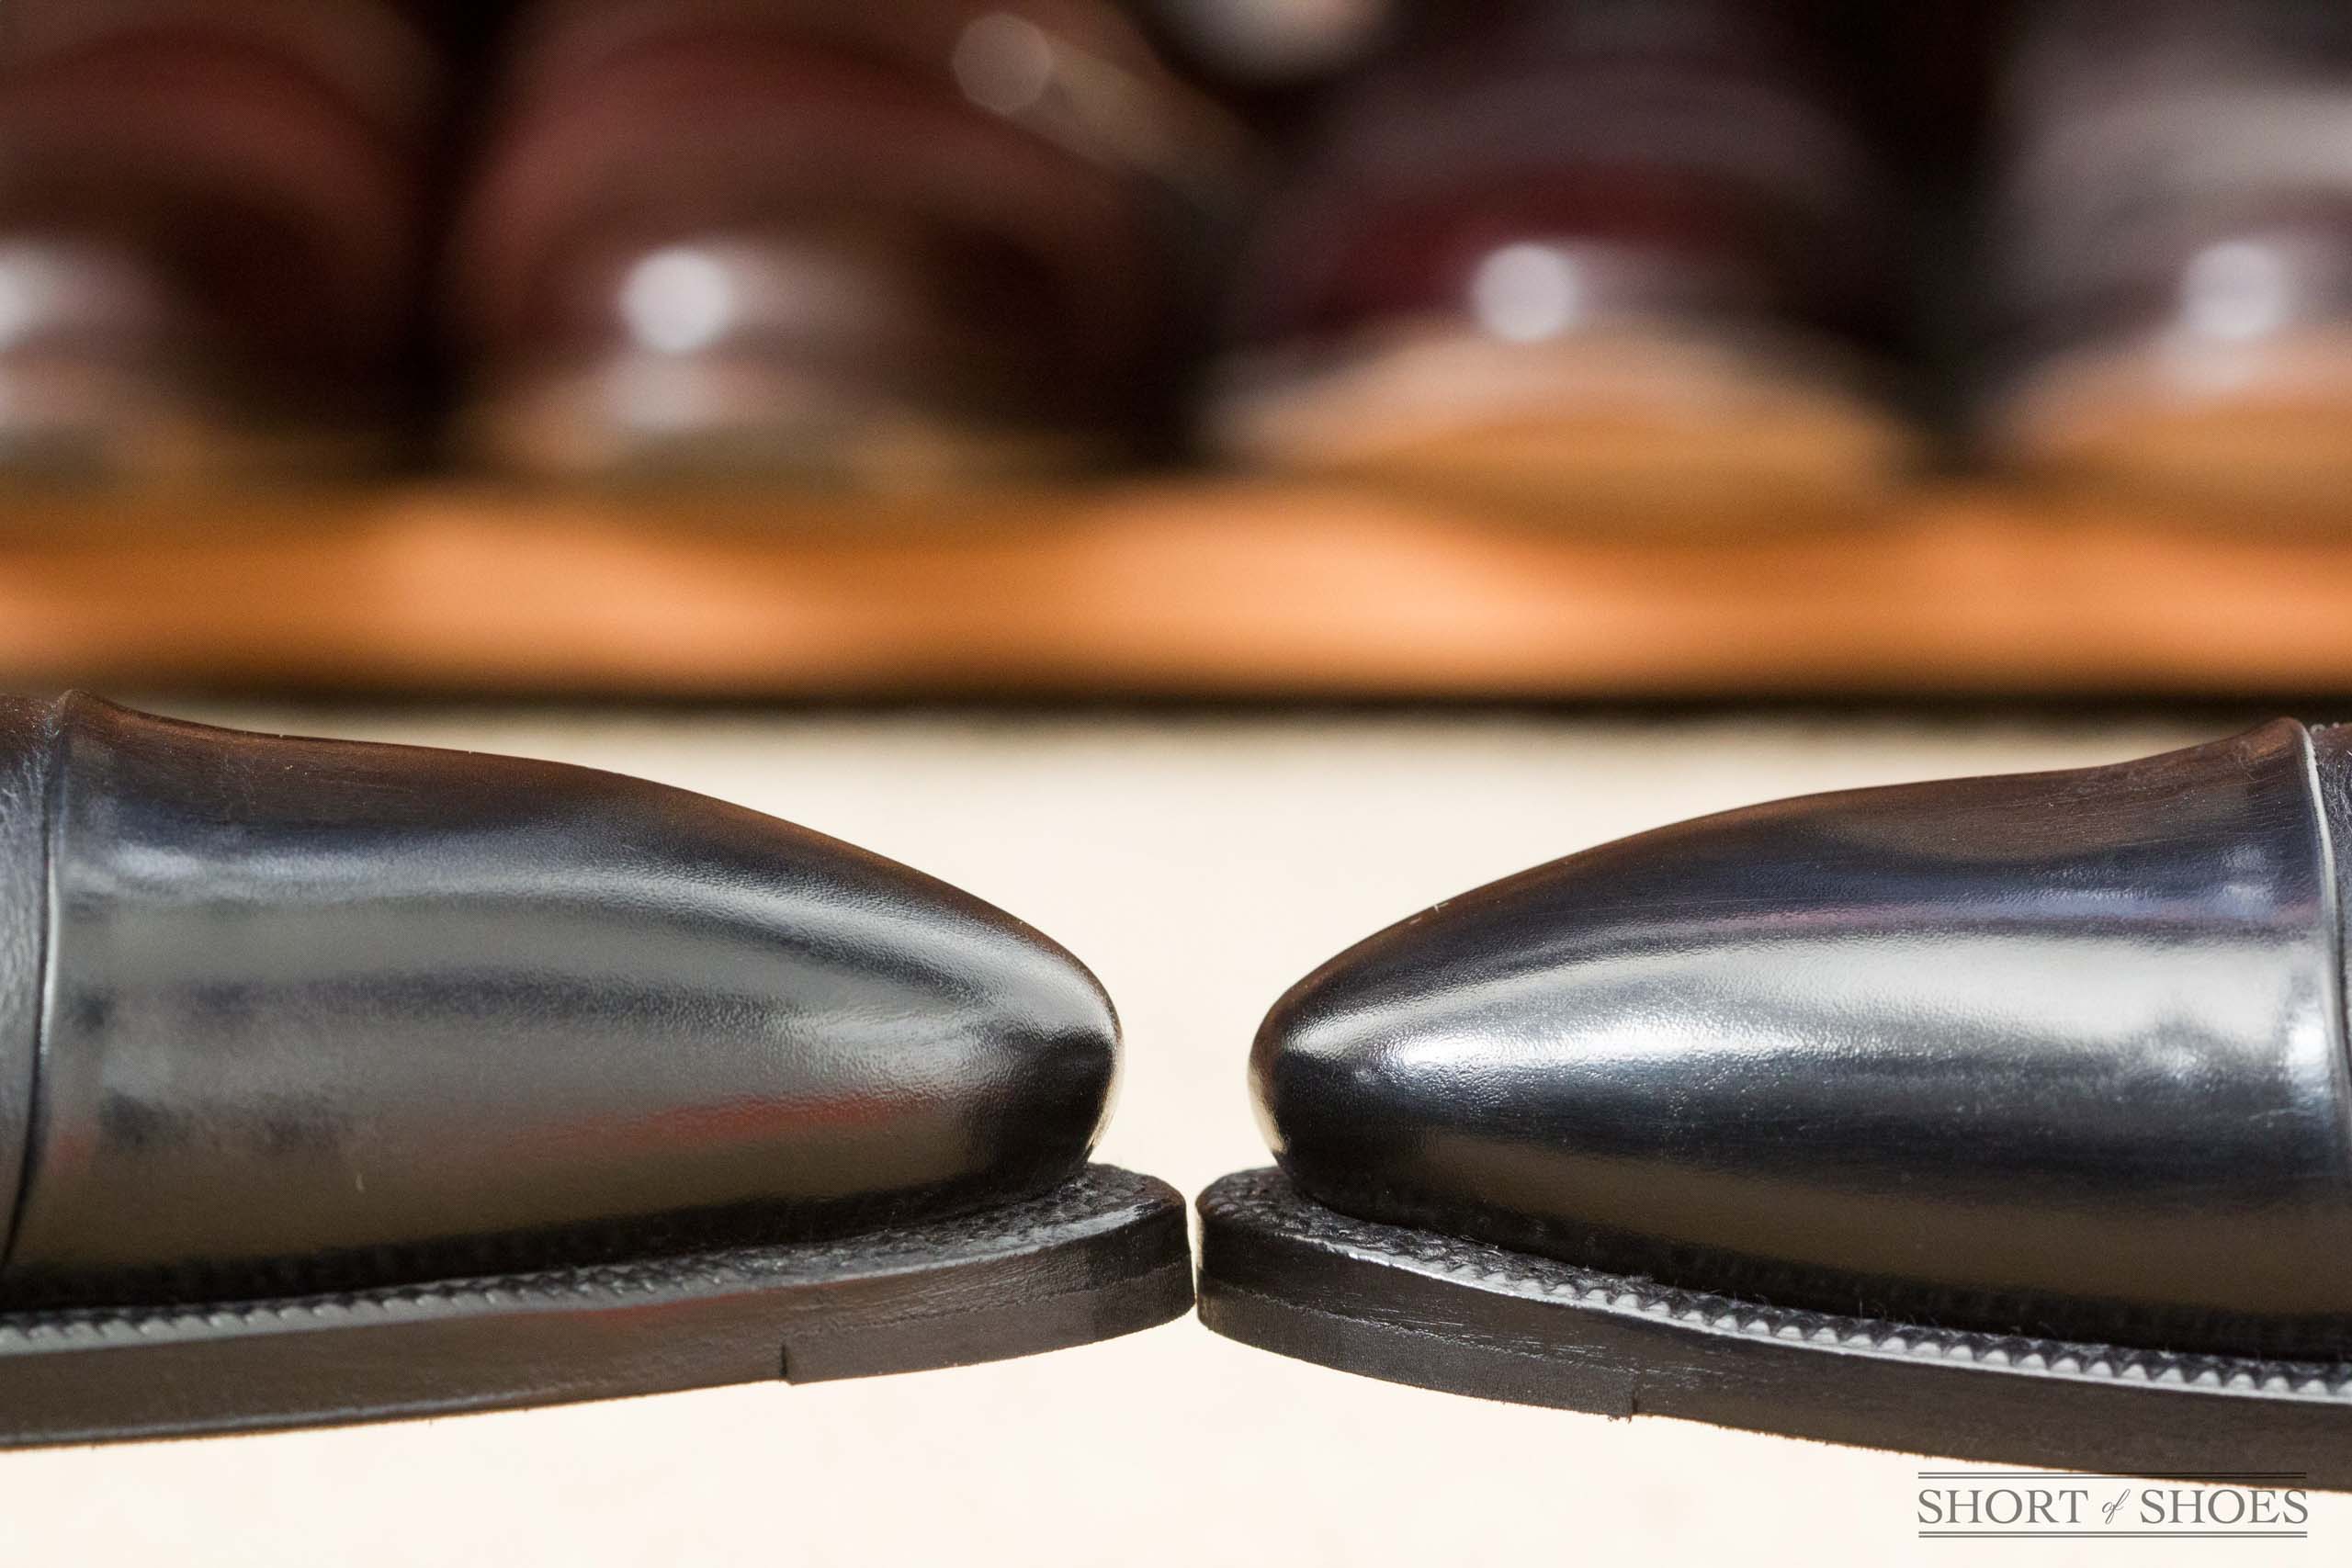 rubber taps for shoe heels